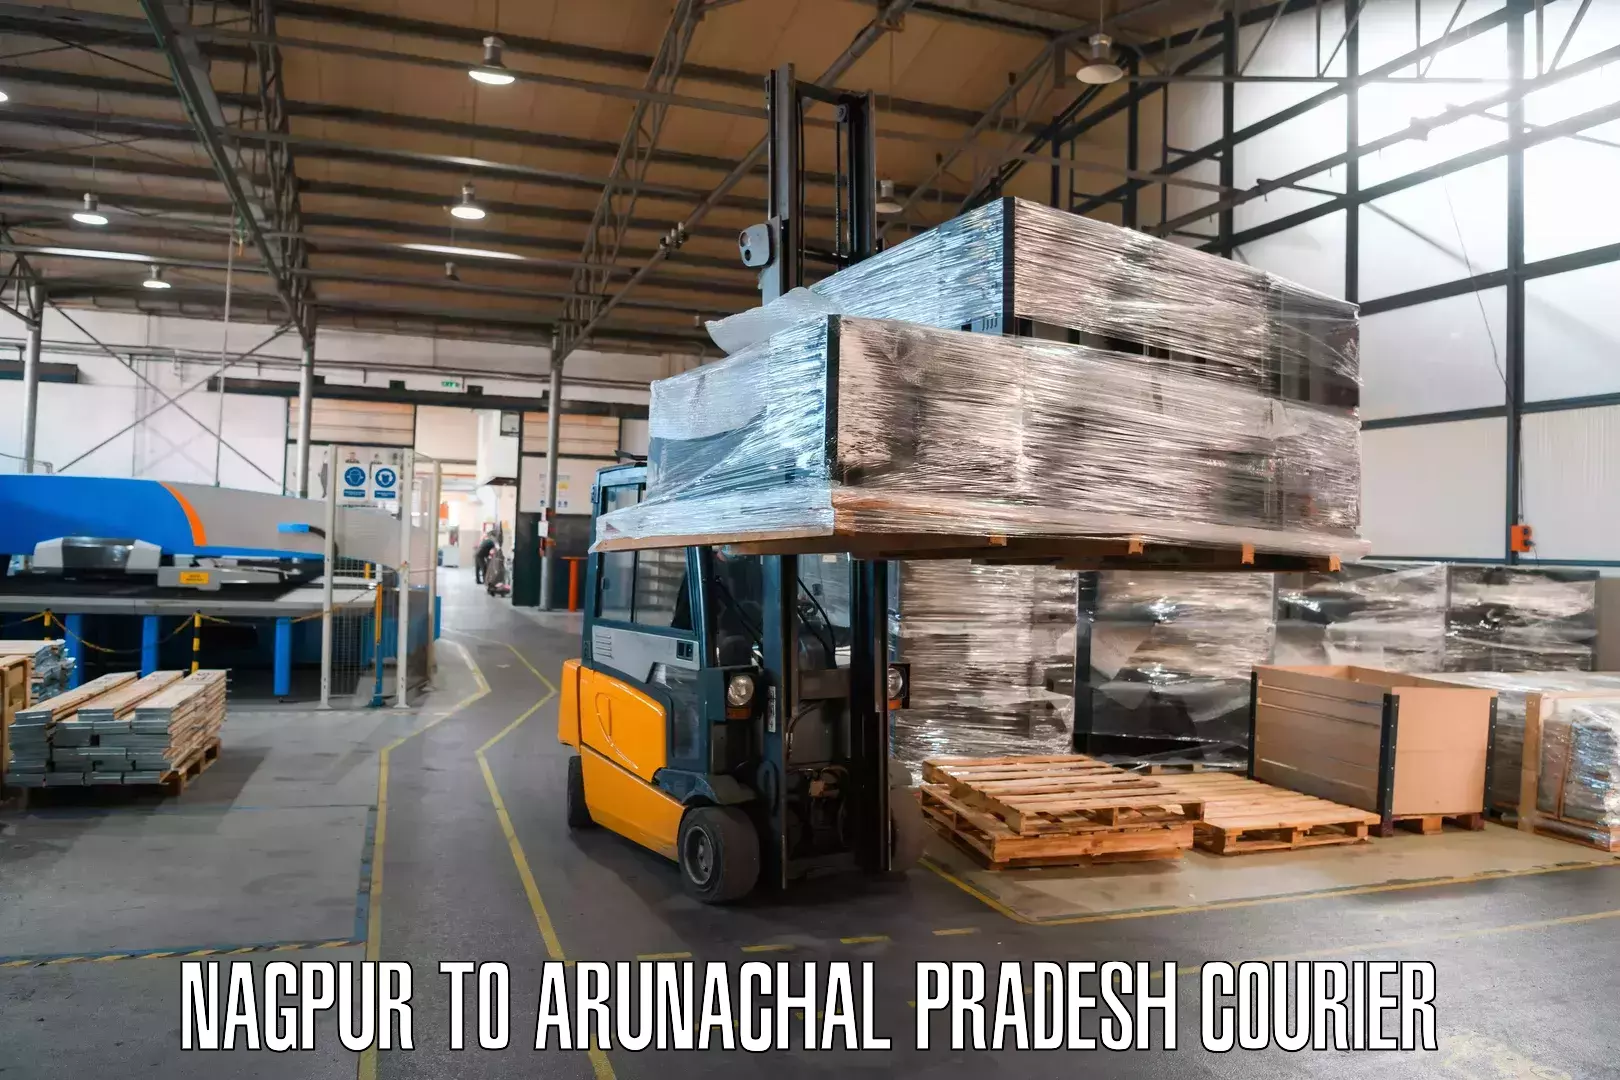 Courier service booking Nagpur to Deomali